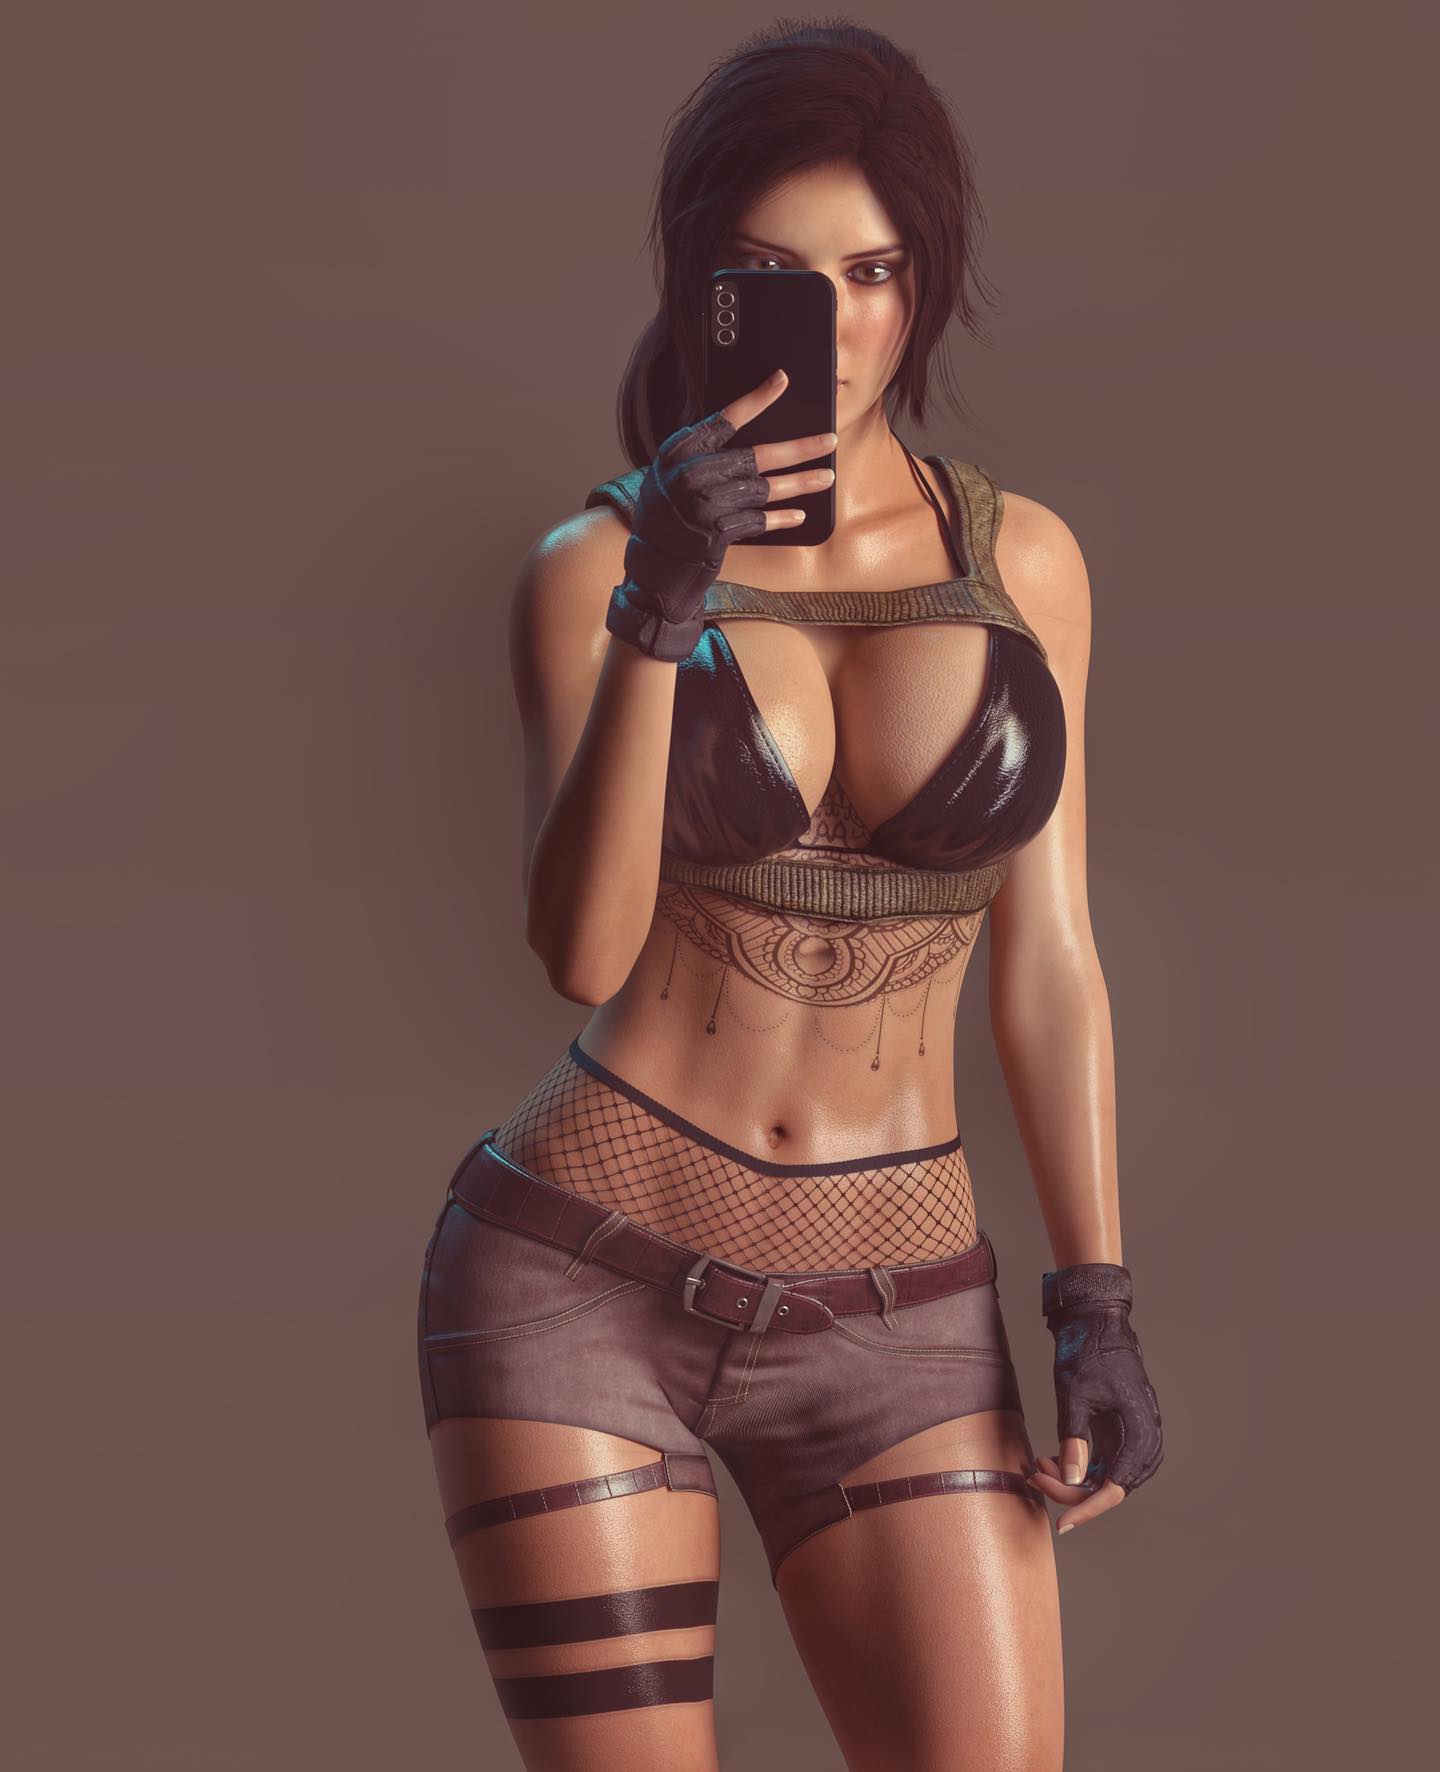 [NOT A GUIDE] The 3Dx artwork of Lara image 103